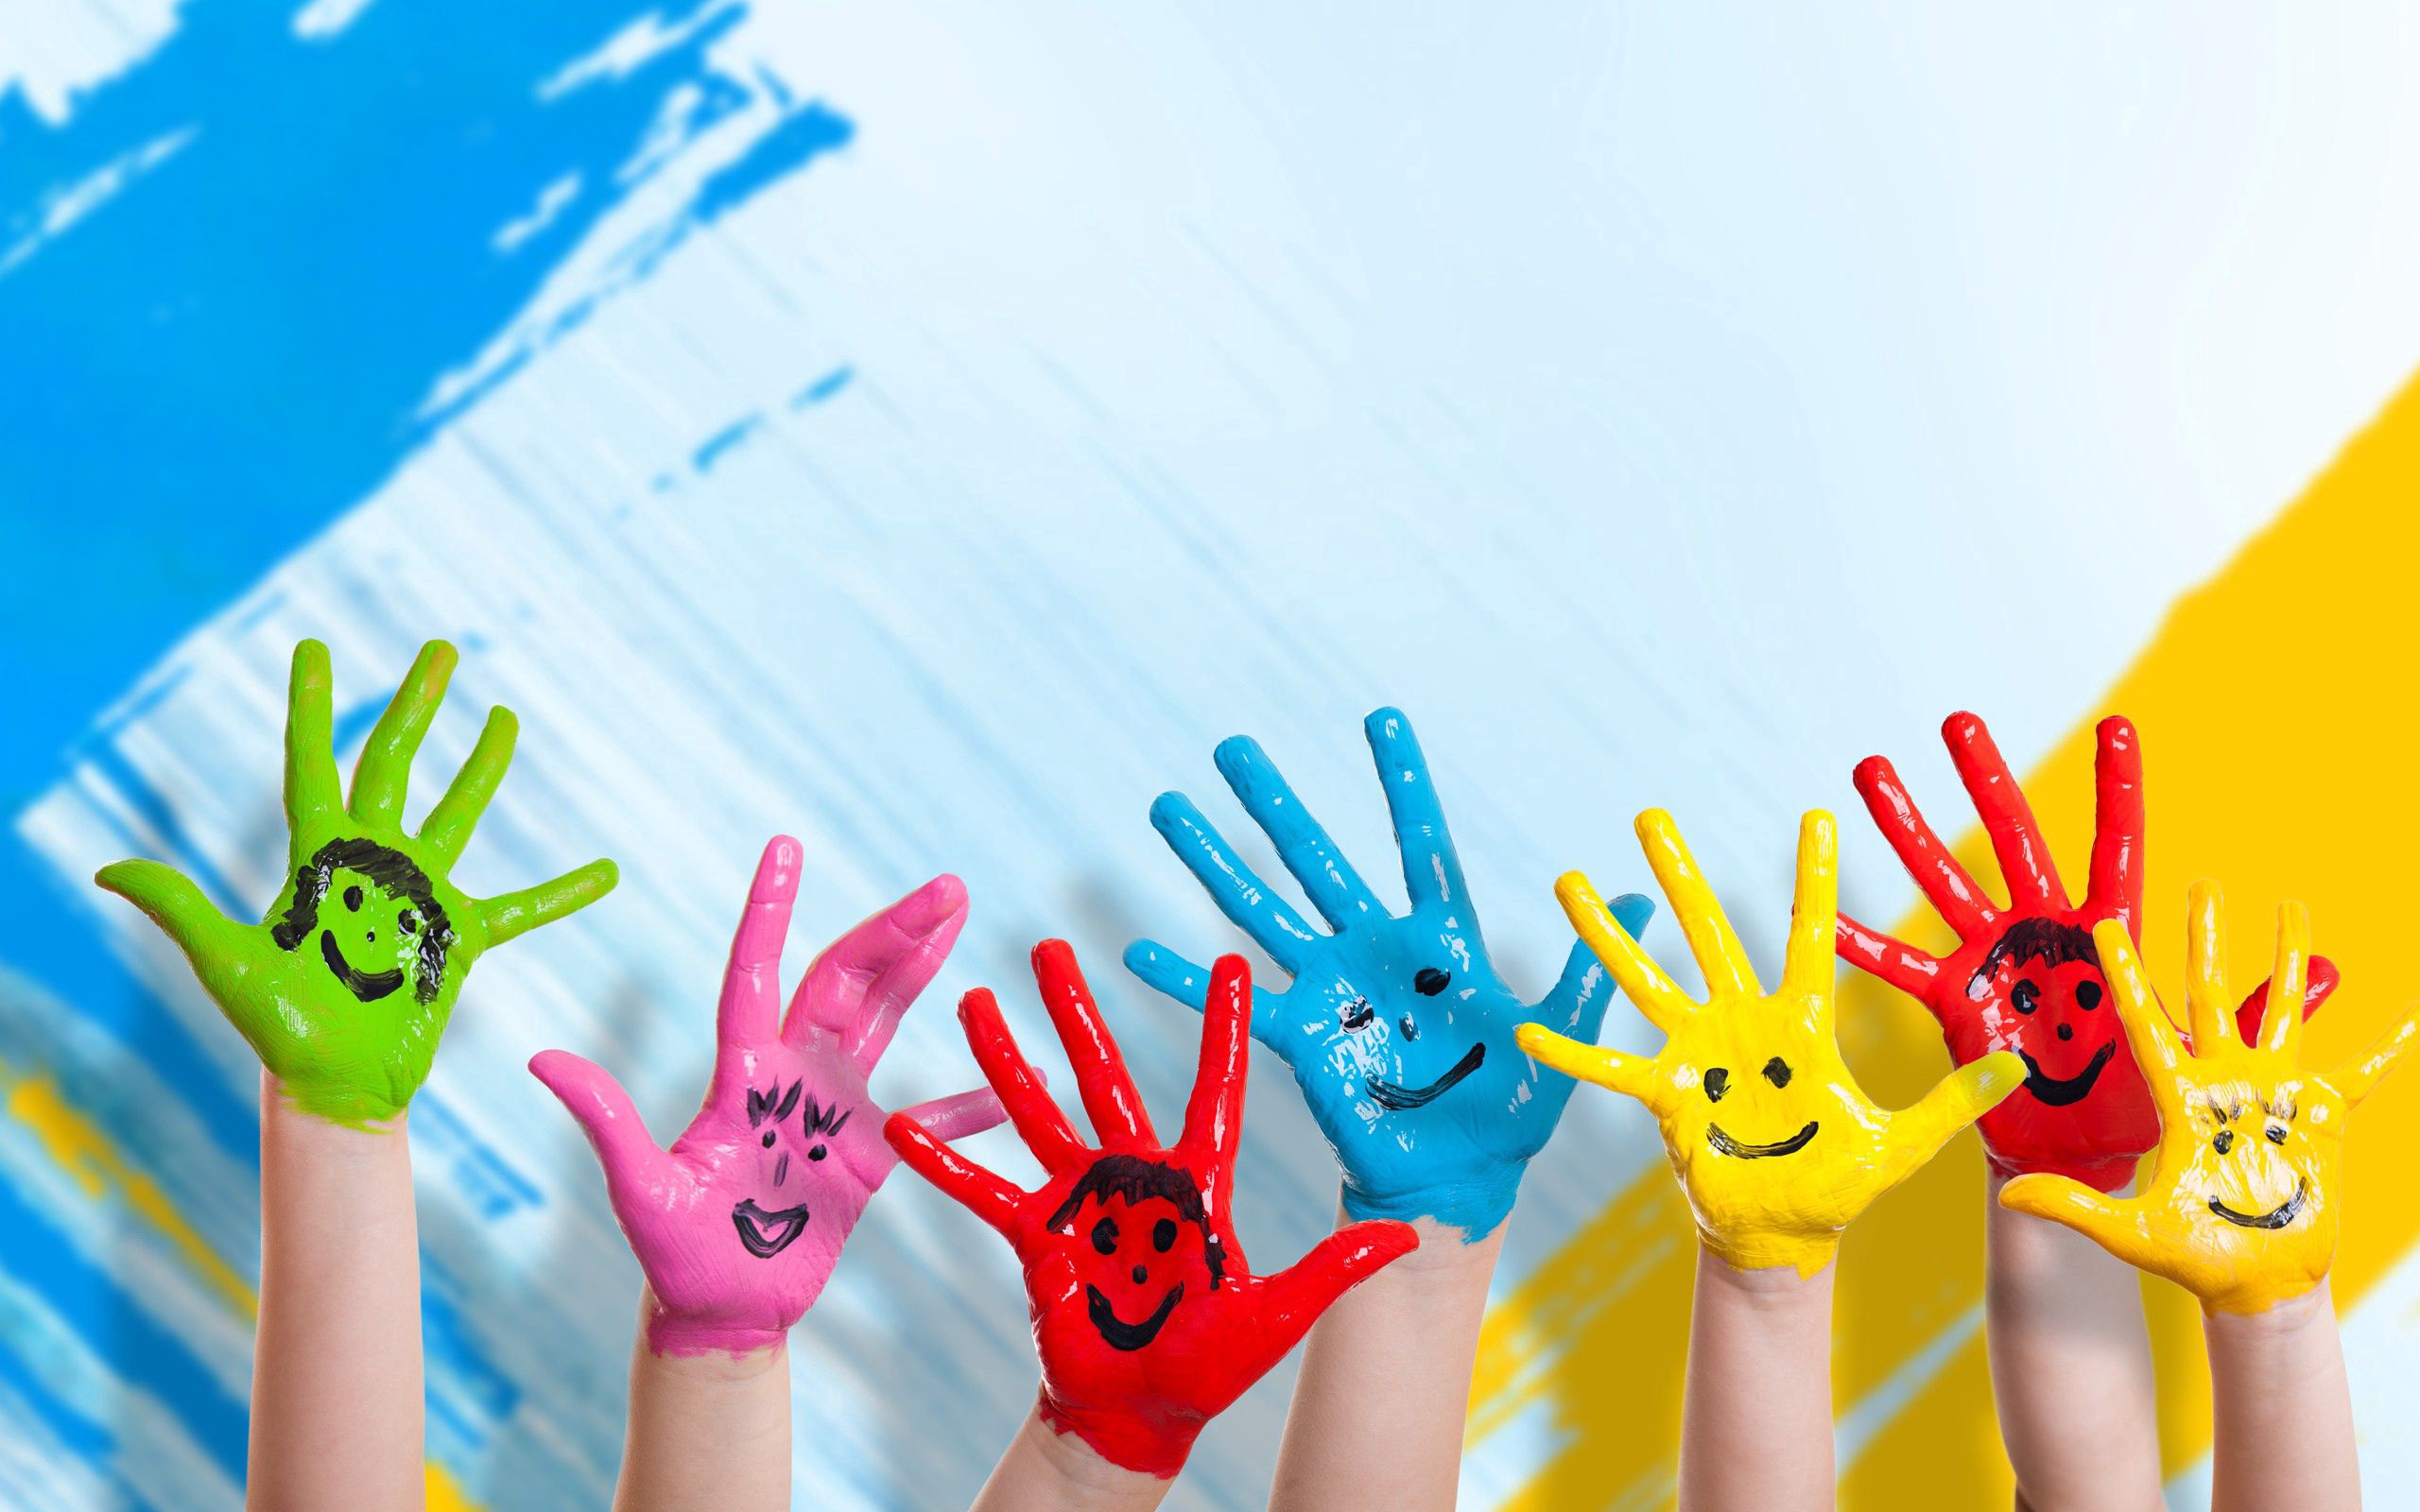 paint, children, happiness, positive, smiles, hands, smile, miscellanea, miscellaneous cell phone wallpapers